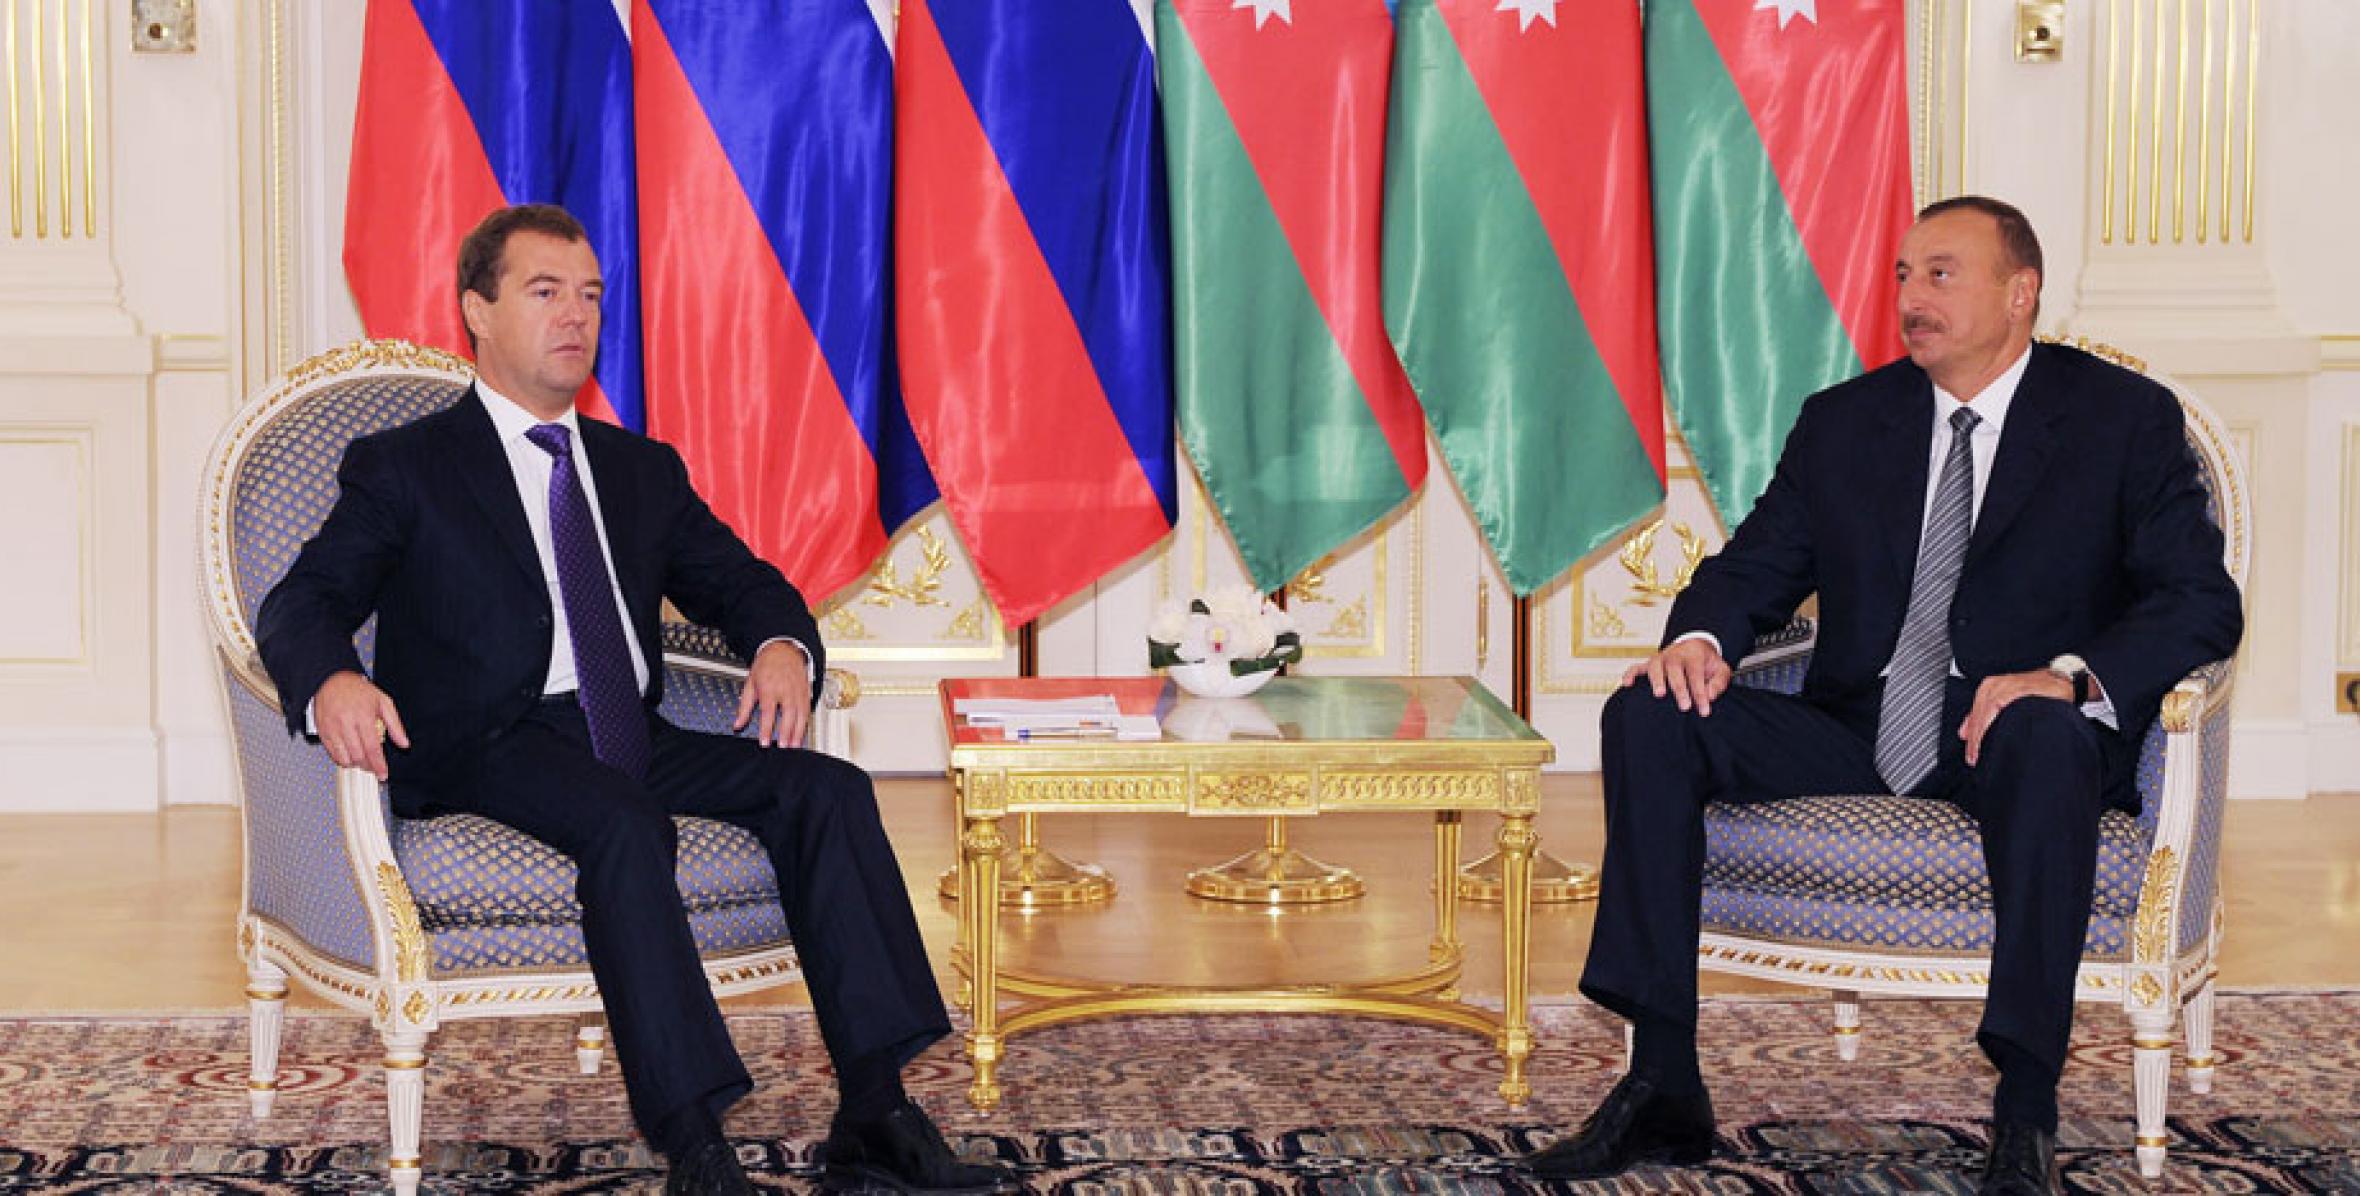 Ilham Aliyev and Russian President Dmitry Medvedev held a private meeting